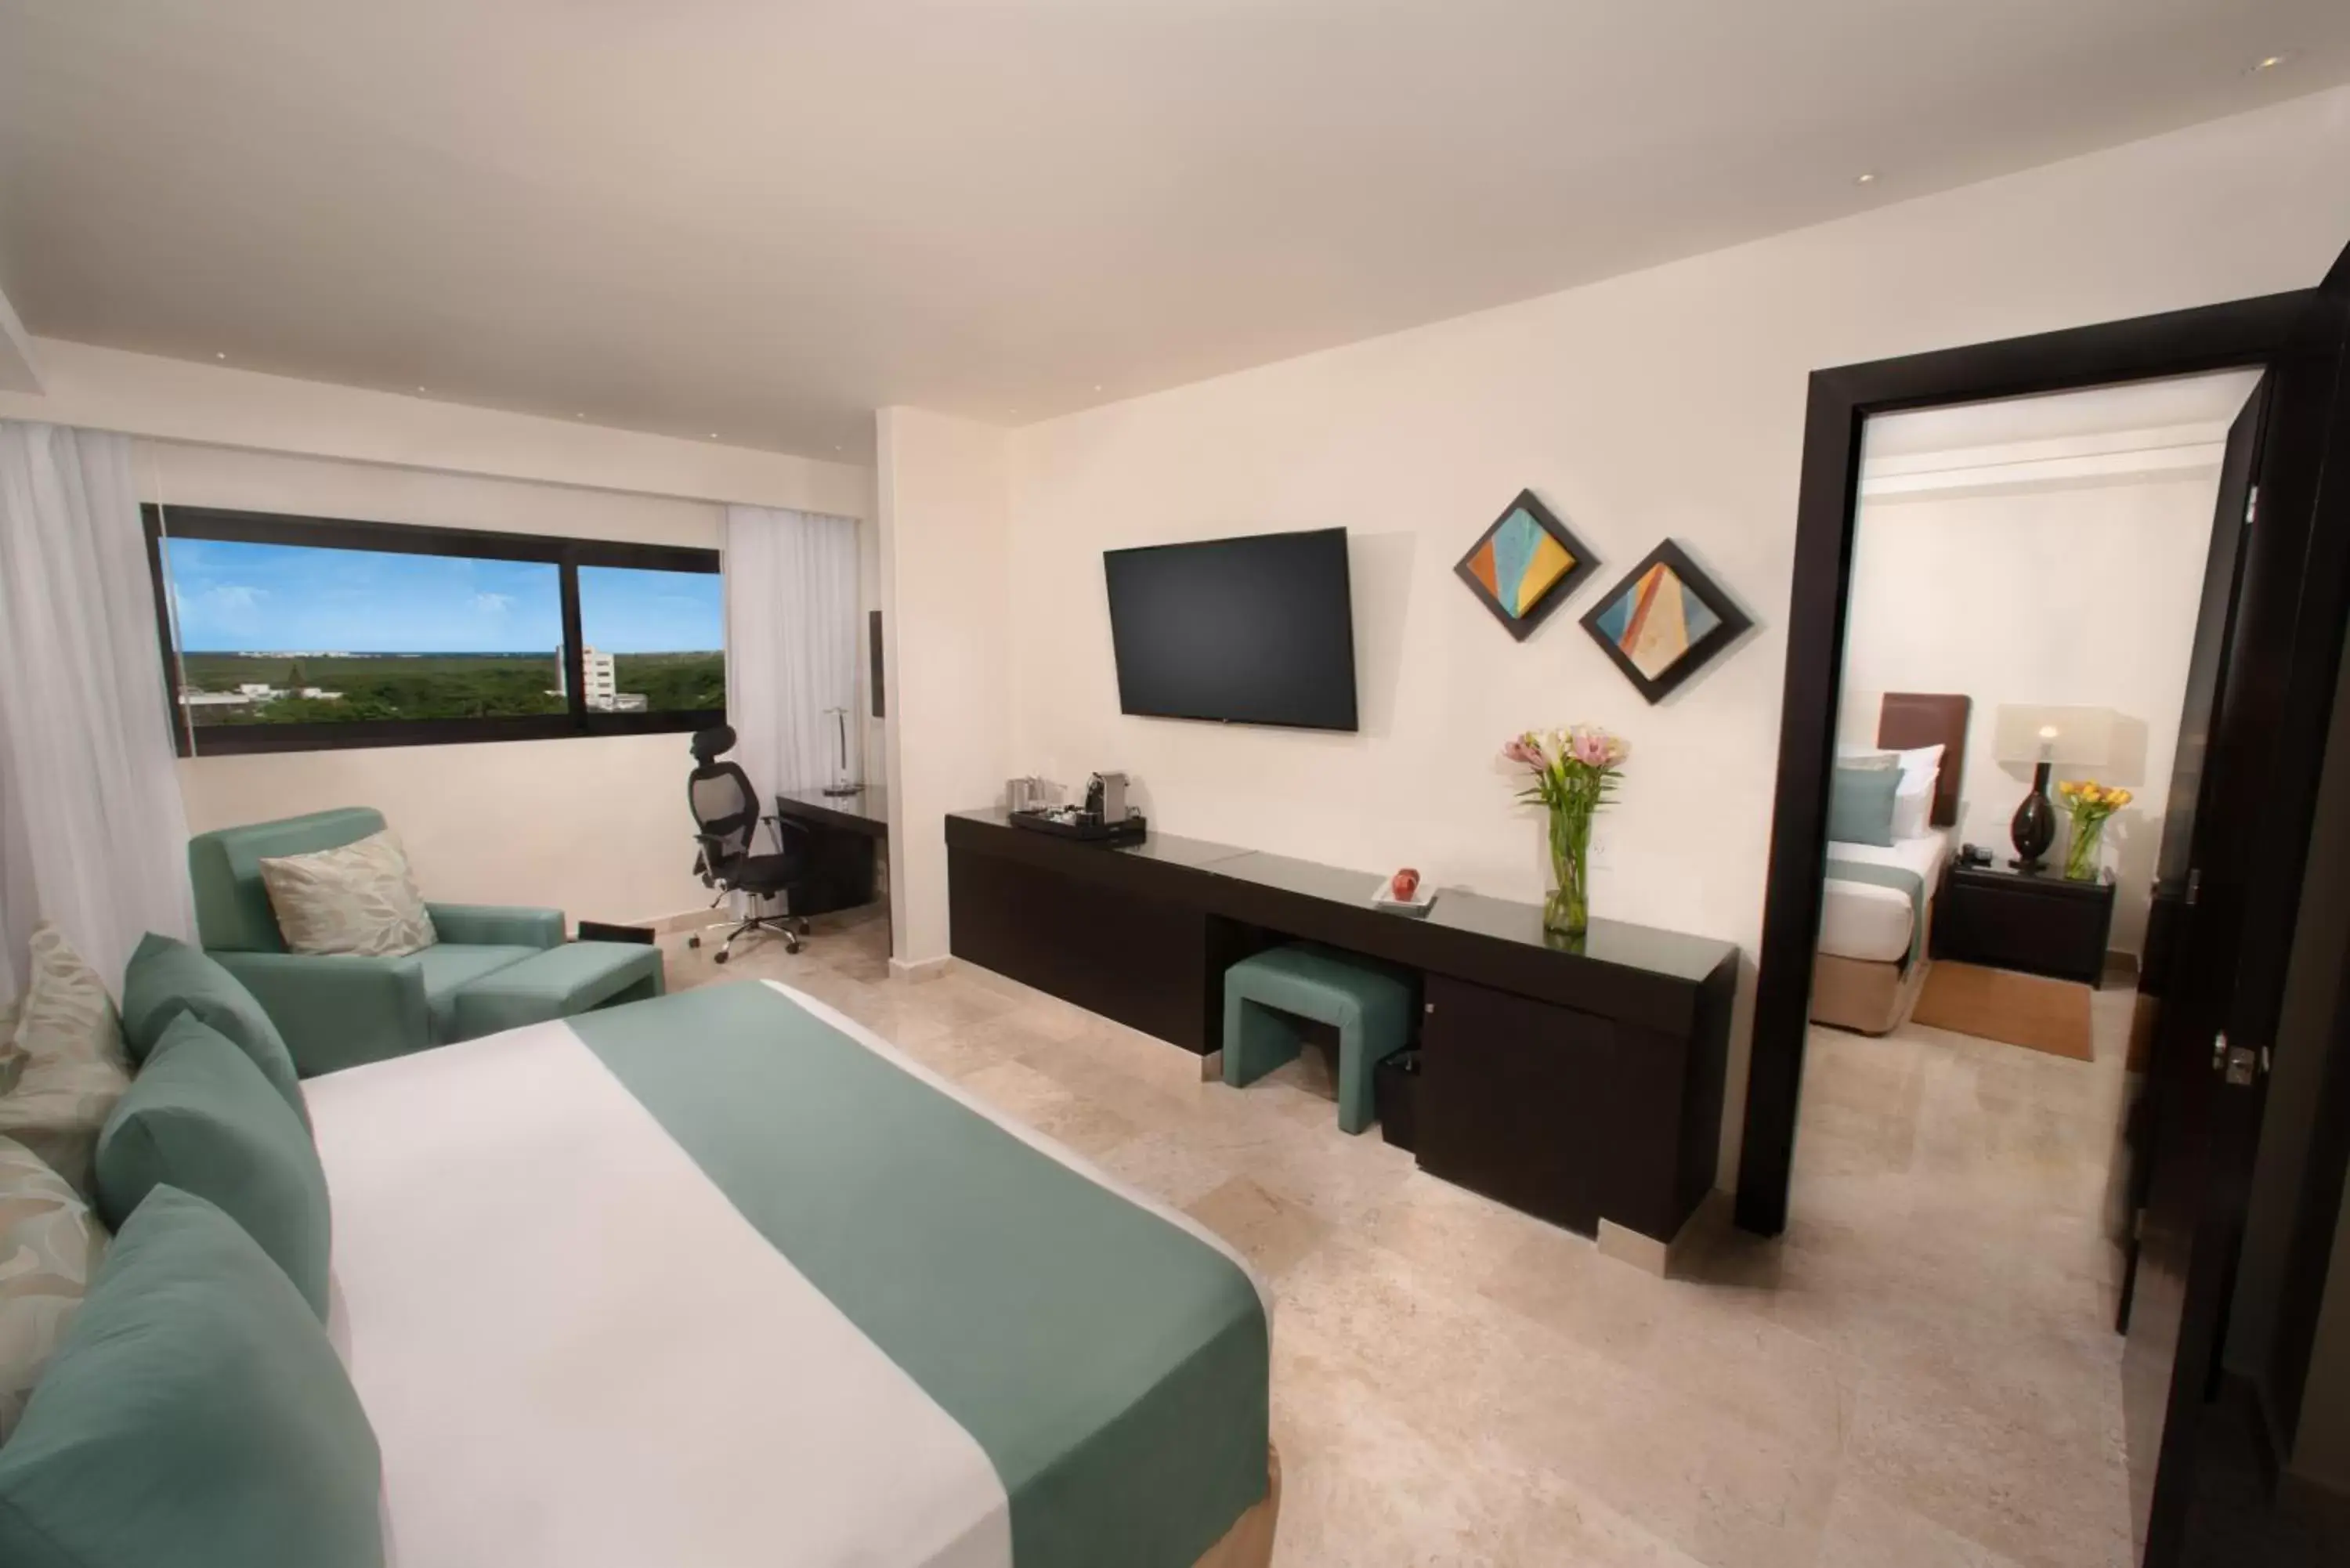 Bedroom in Smart Cancun by Oasis